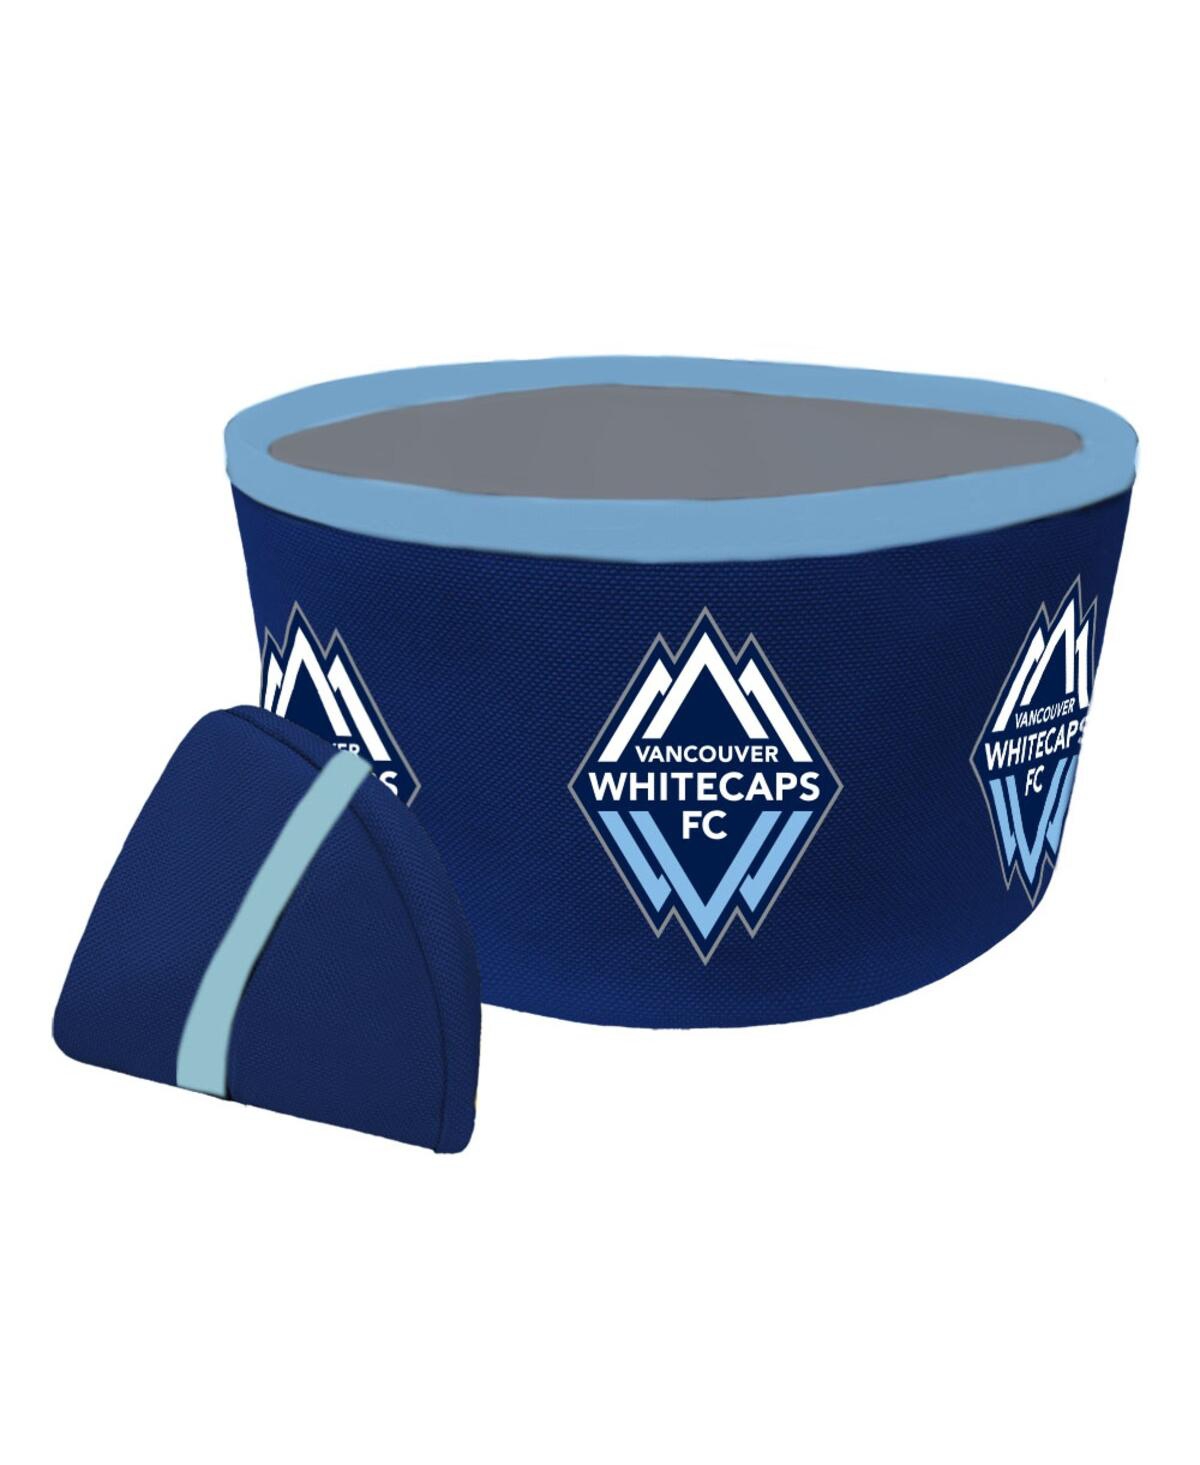 Vancouver Whitecaps Fc Collapsible Travel Dog Bowl - Blue